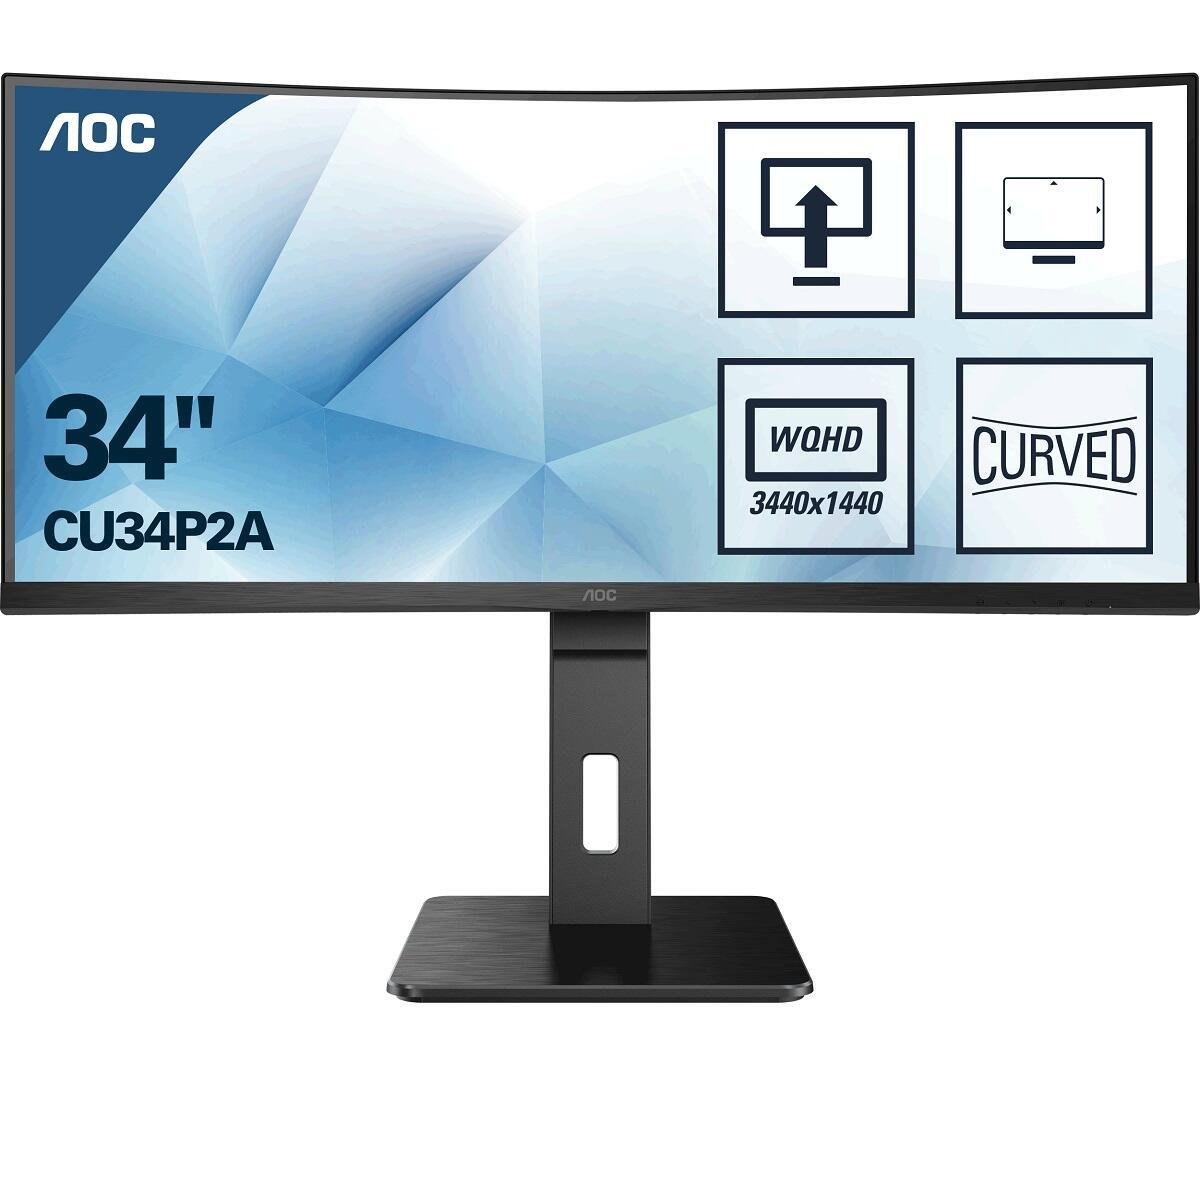 P2 Series - 34 inch - Curved - UltraWide Quad HD VA LED Monitor - 3440x1440 - HAS / Speakers